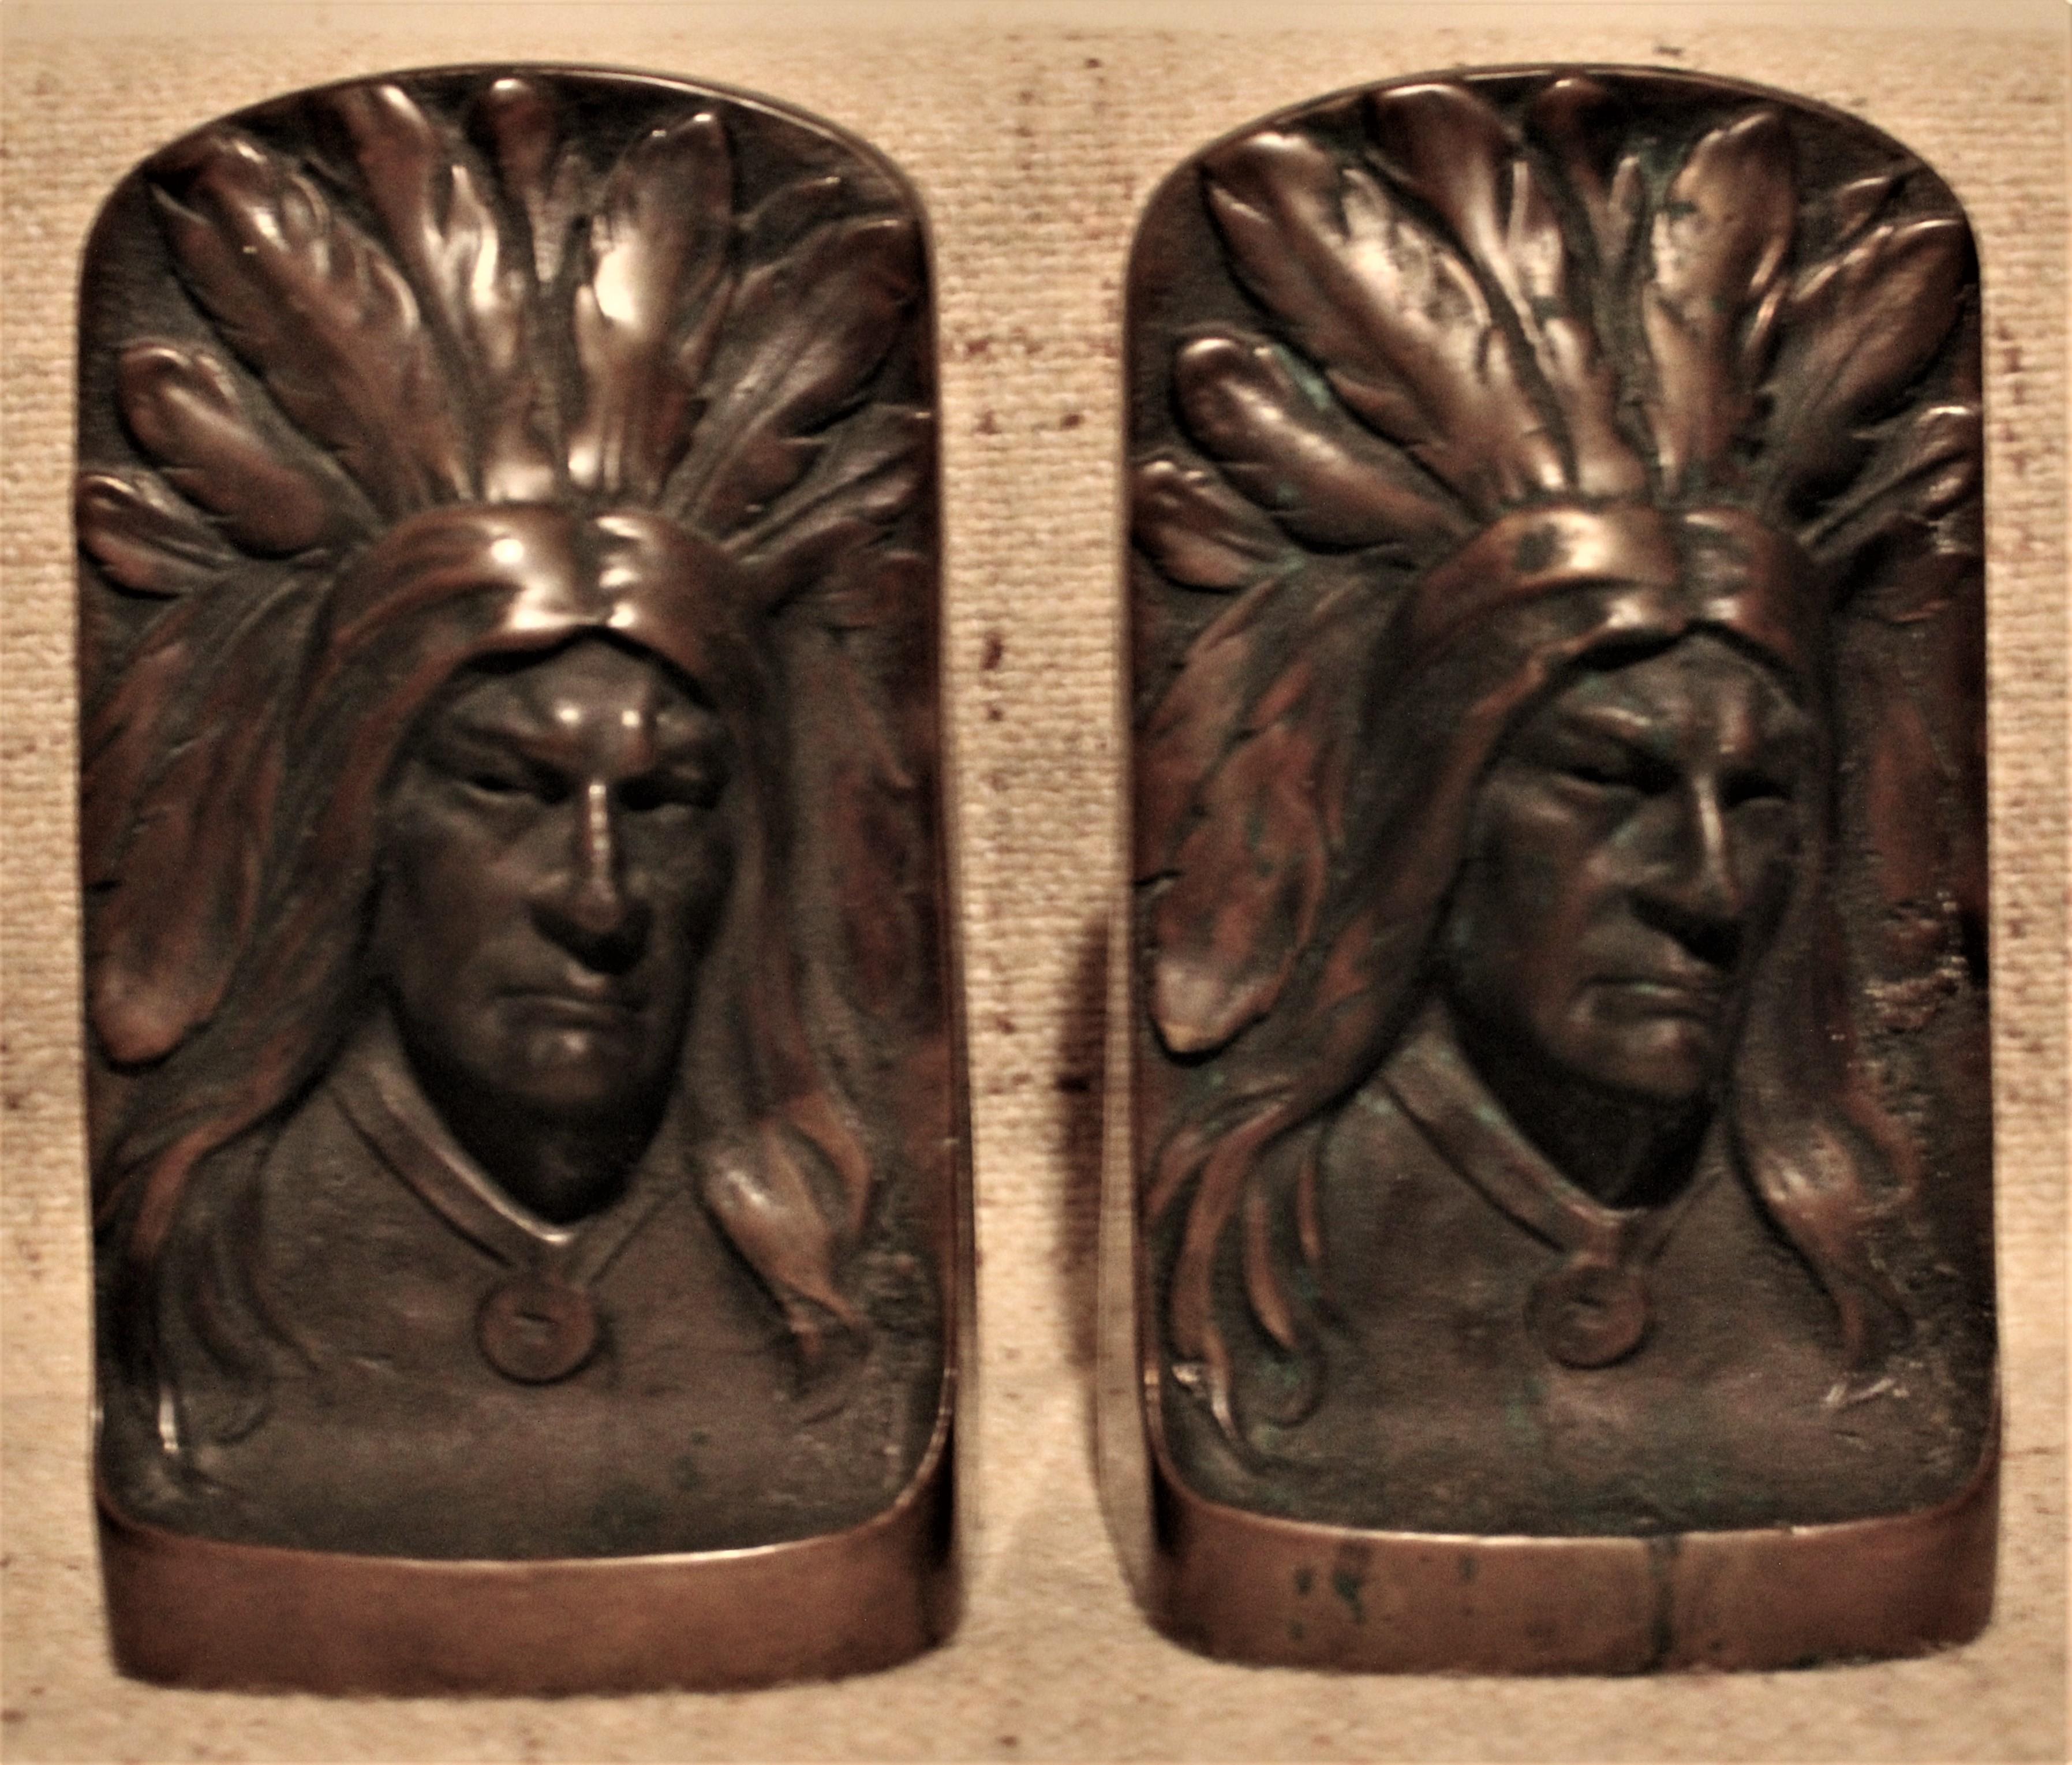 Matched pair of detailed cast bronze bookends depicting a North American Indian Chief bust. There are no maker's marks, initials or signature of either an artist or foundry present on these pieces, nor has an identical set been found to venture an